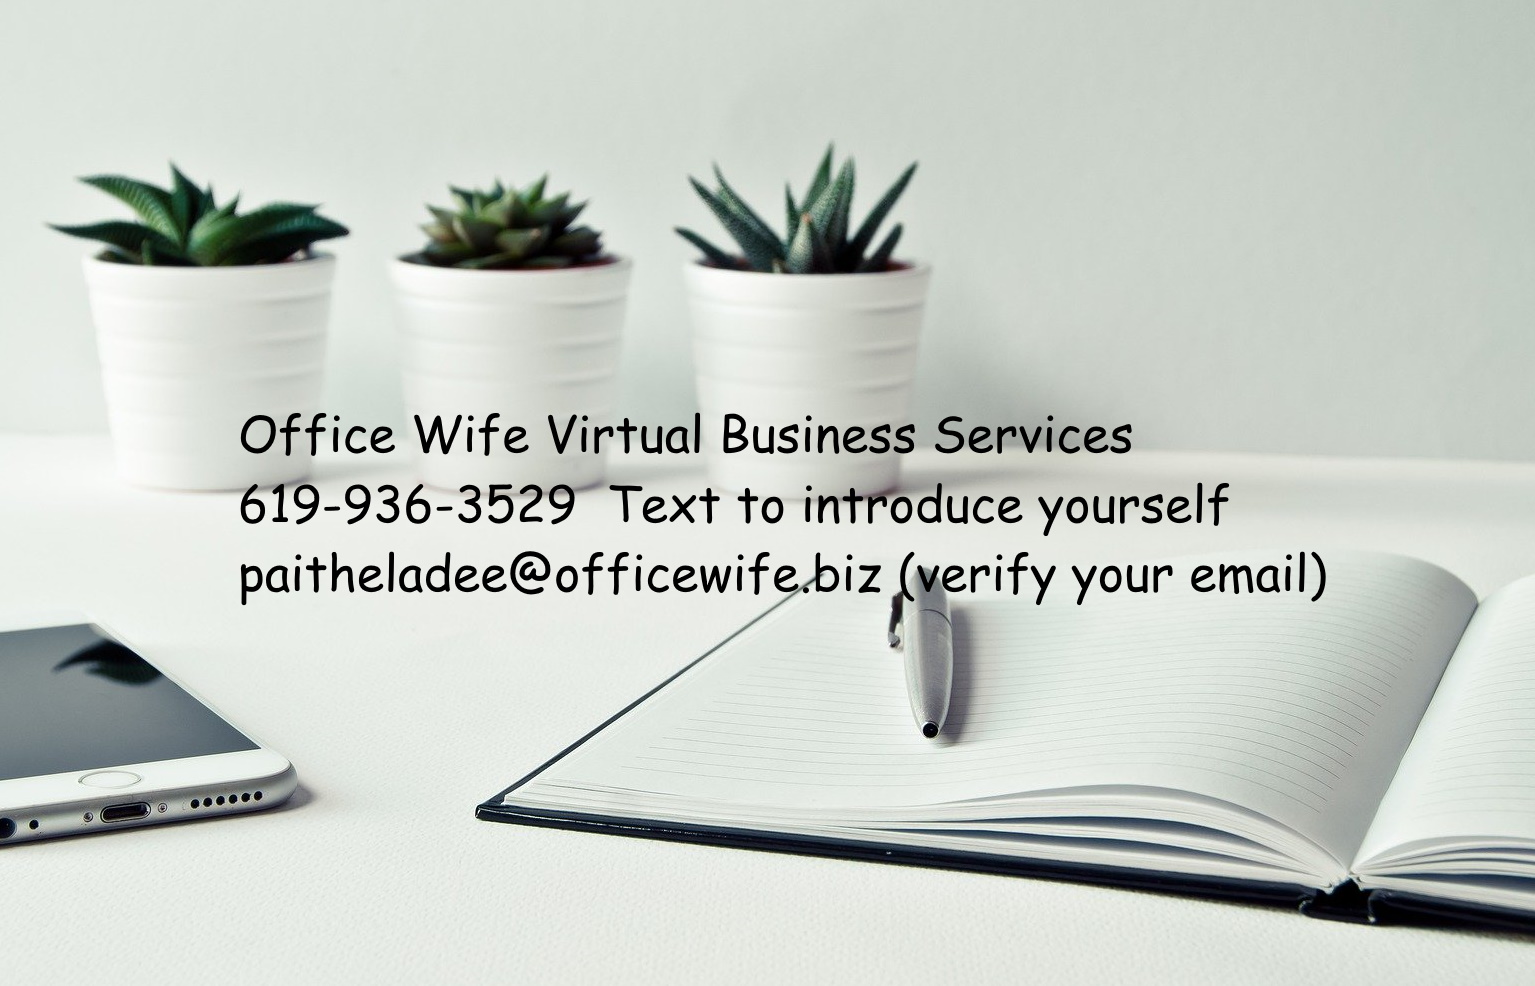 Office Wife Contact Information